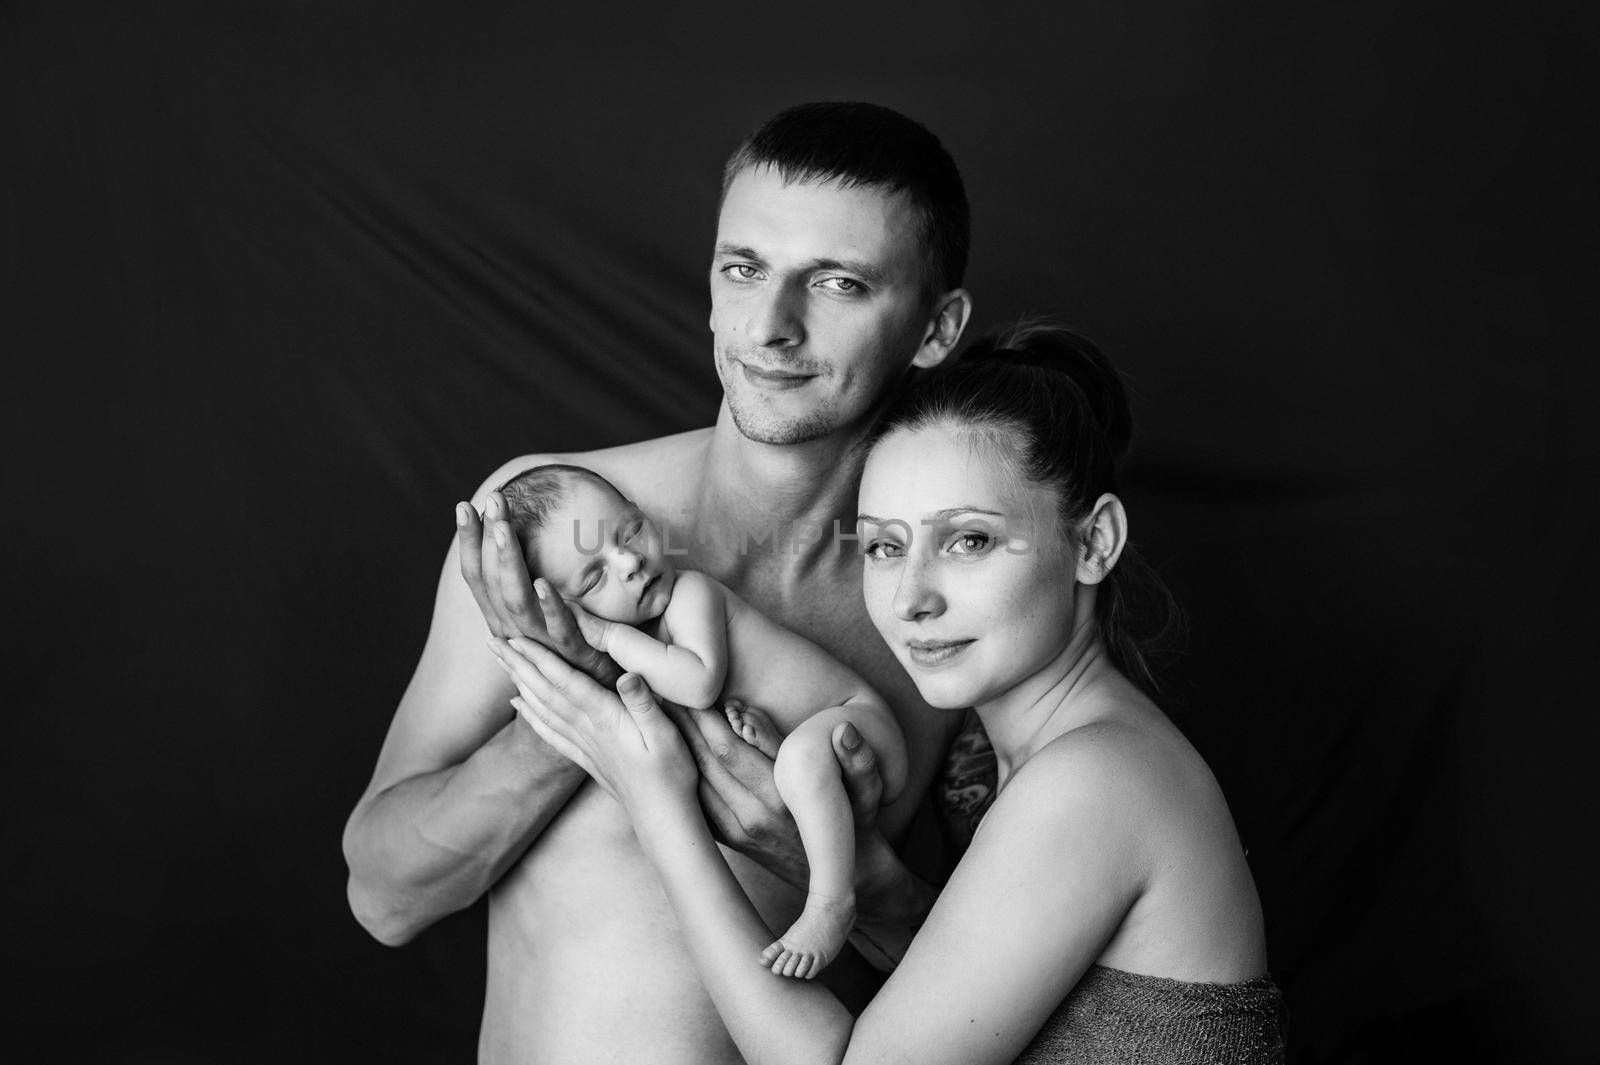 Mother and father holding their newborn baby at a newborn photoshoot. High quality photo